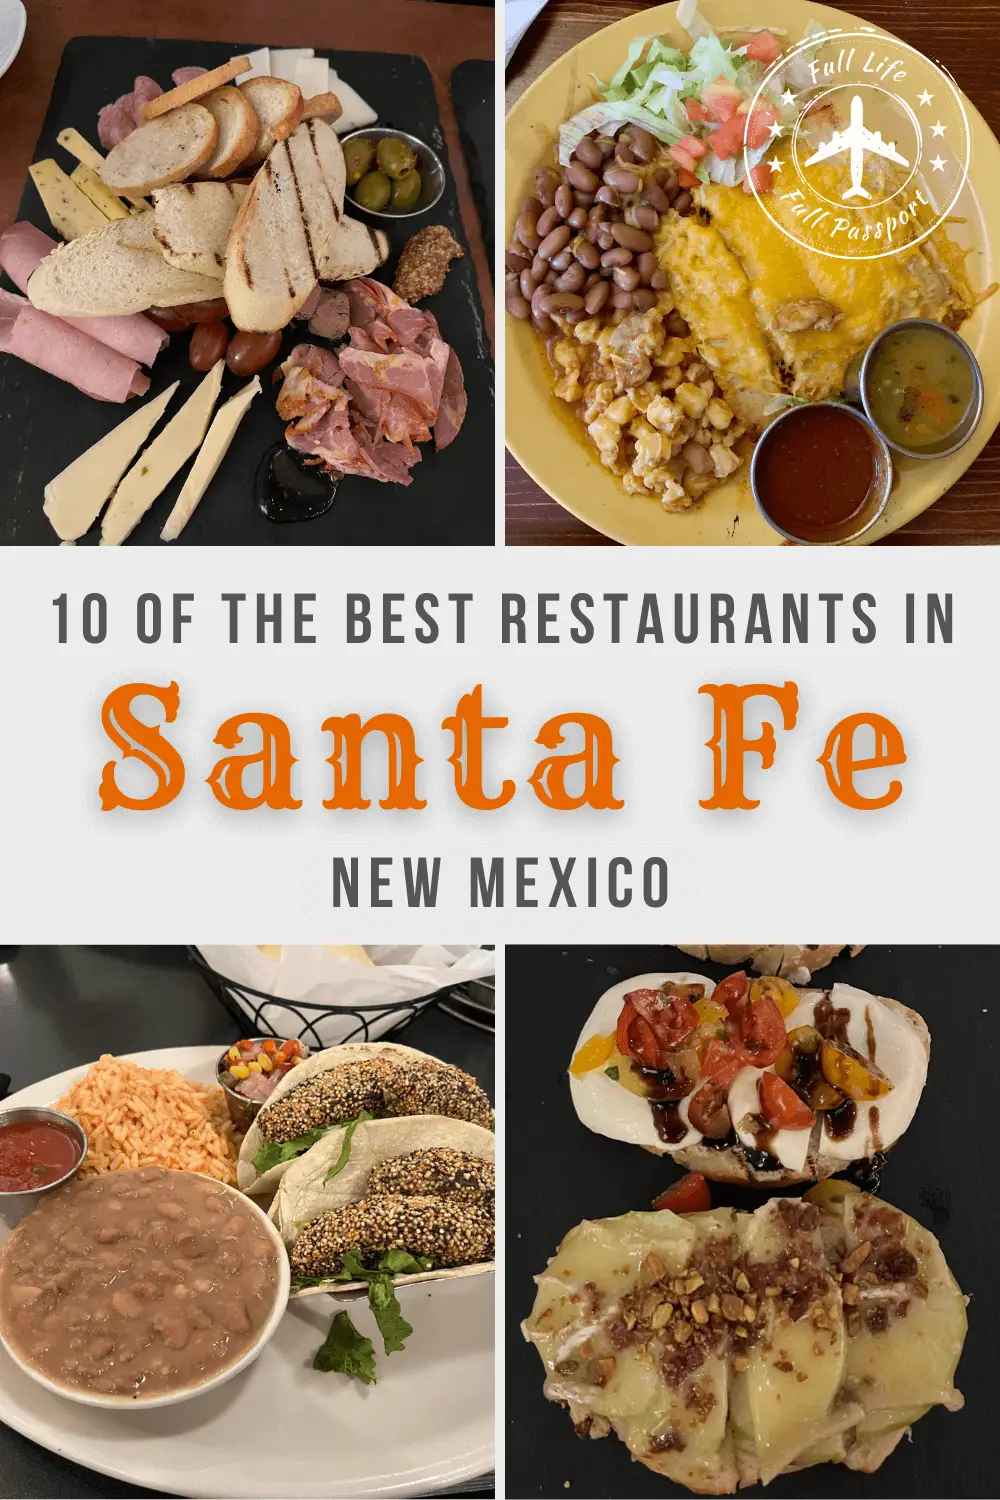 10 of the Best Restaurants in Historic Santa Fe, New Mexico